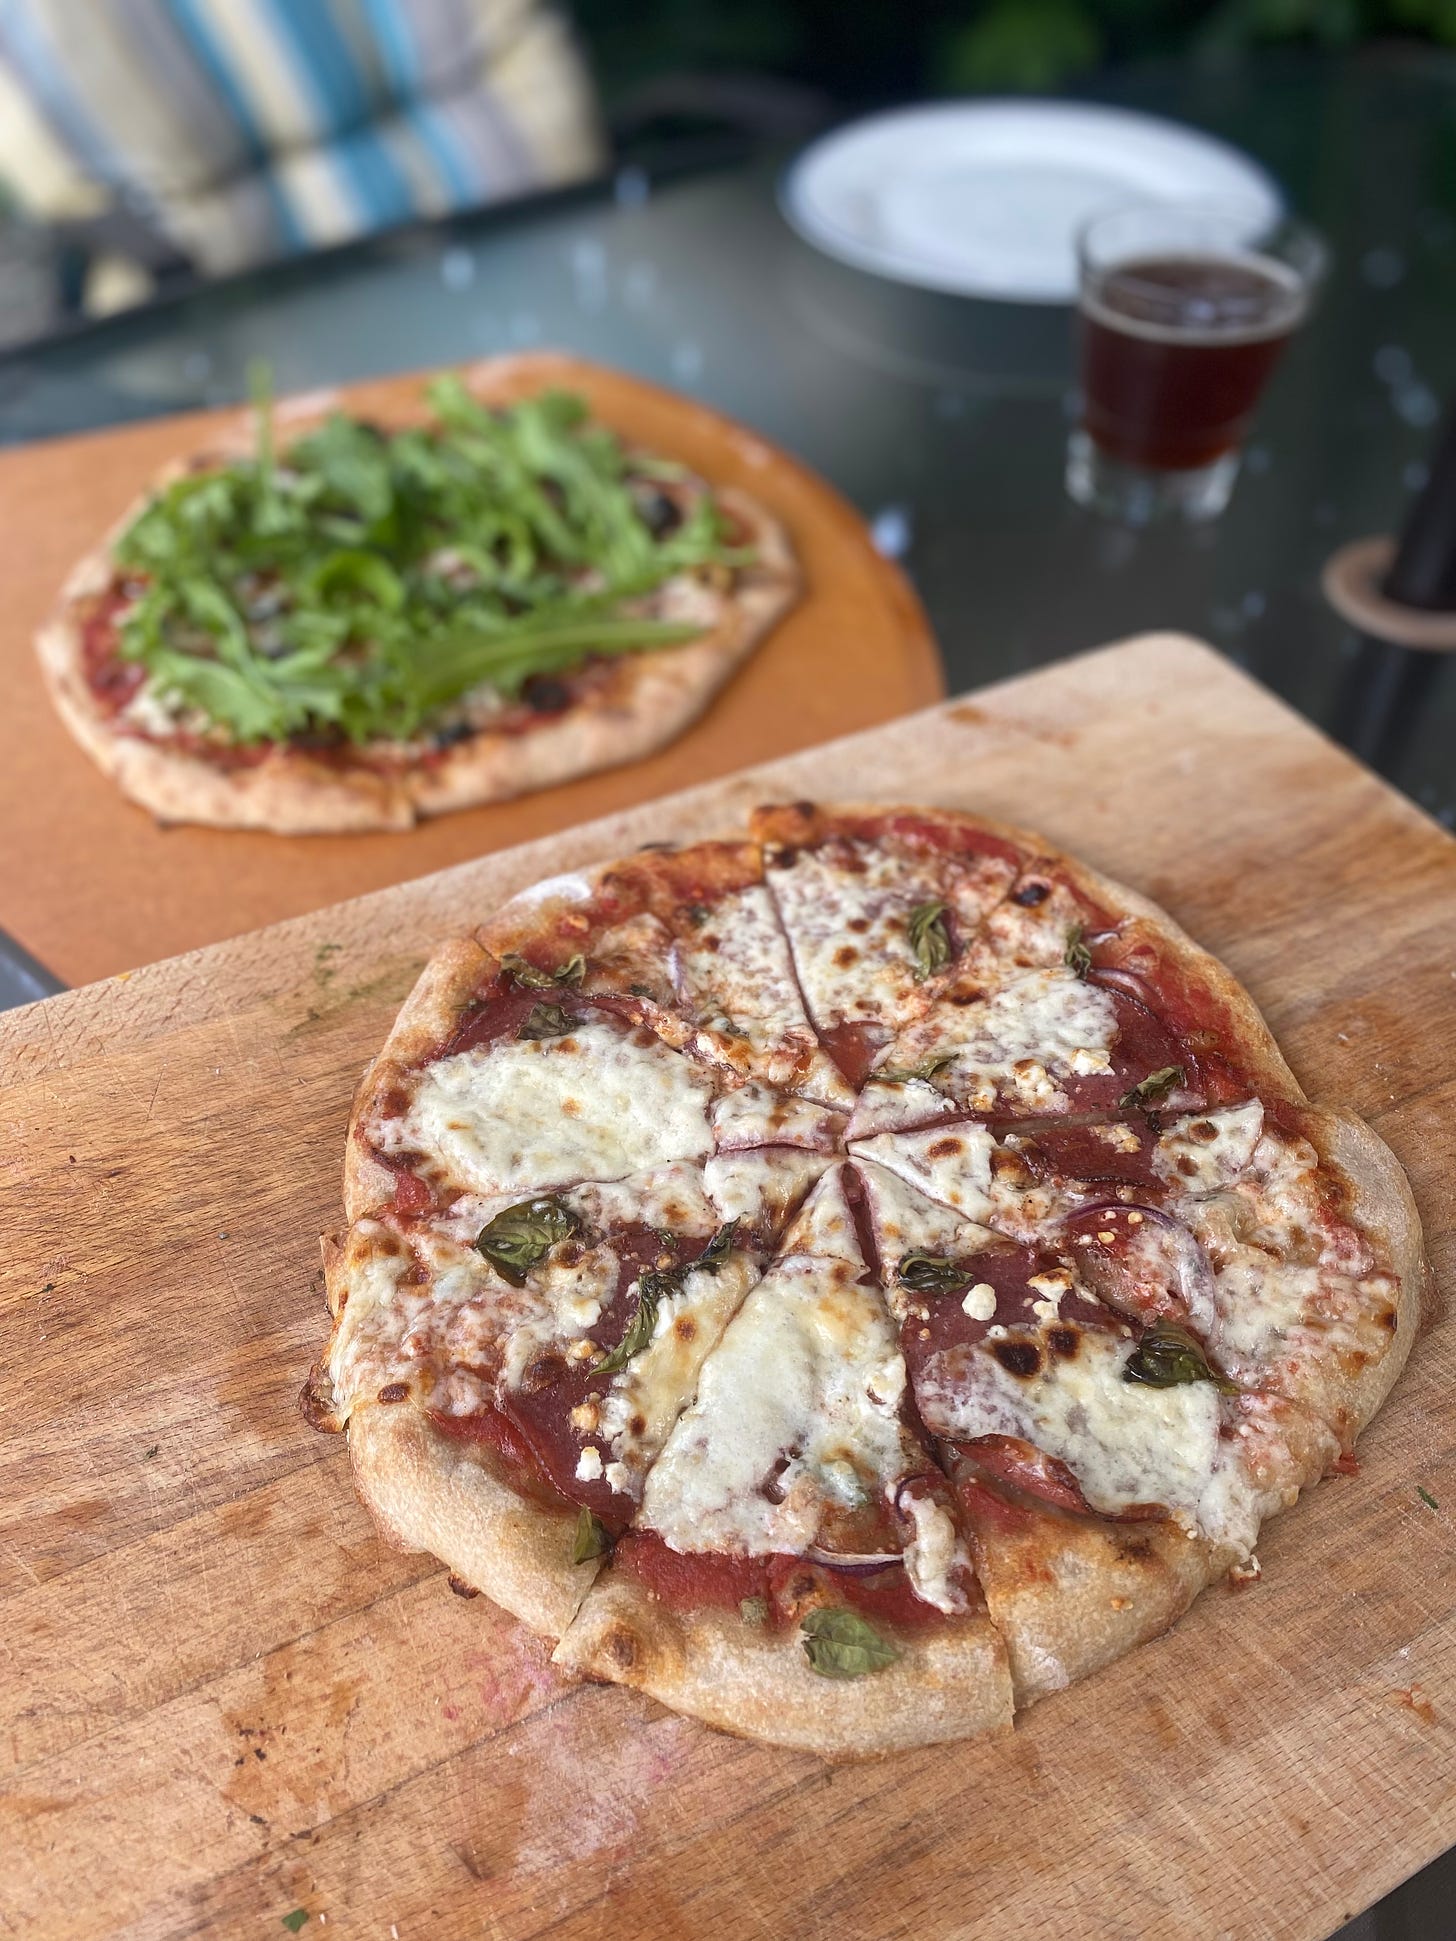 Two pizzas on boards on an outdoor table. The nearest one has bubbled spots of mozza, basil leaves, and salami over a red sauce. The one in the background is blurred and scattered with arugula.